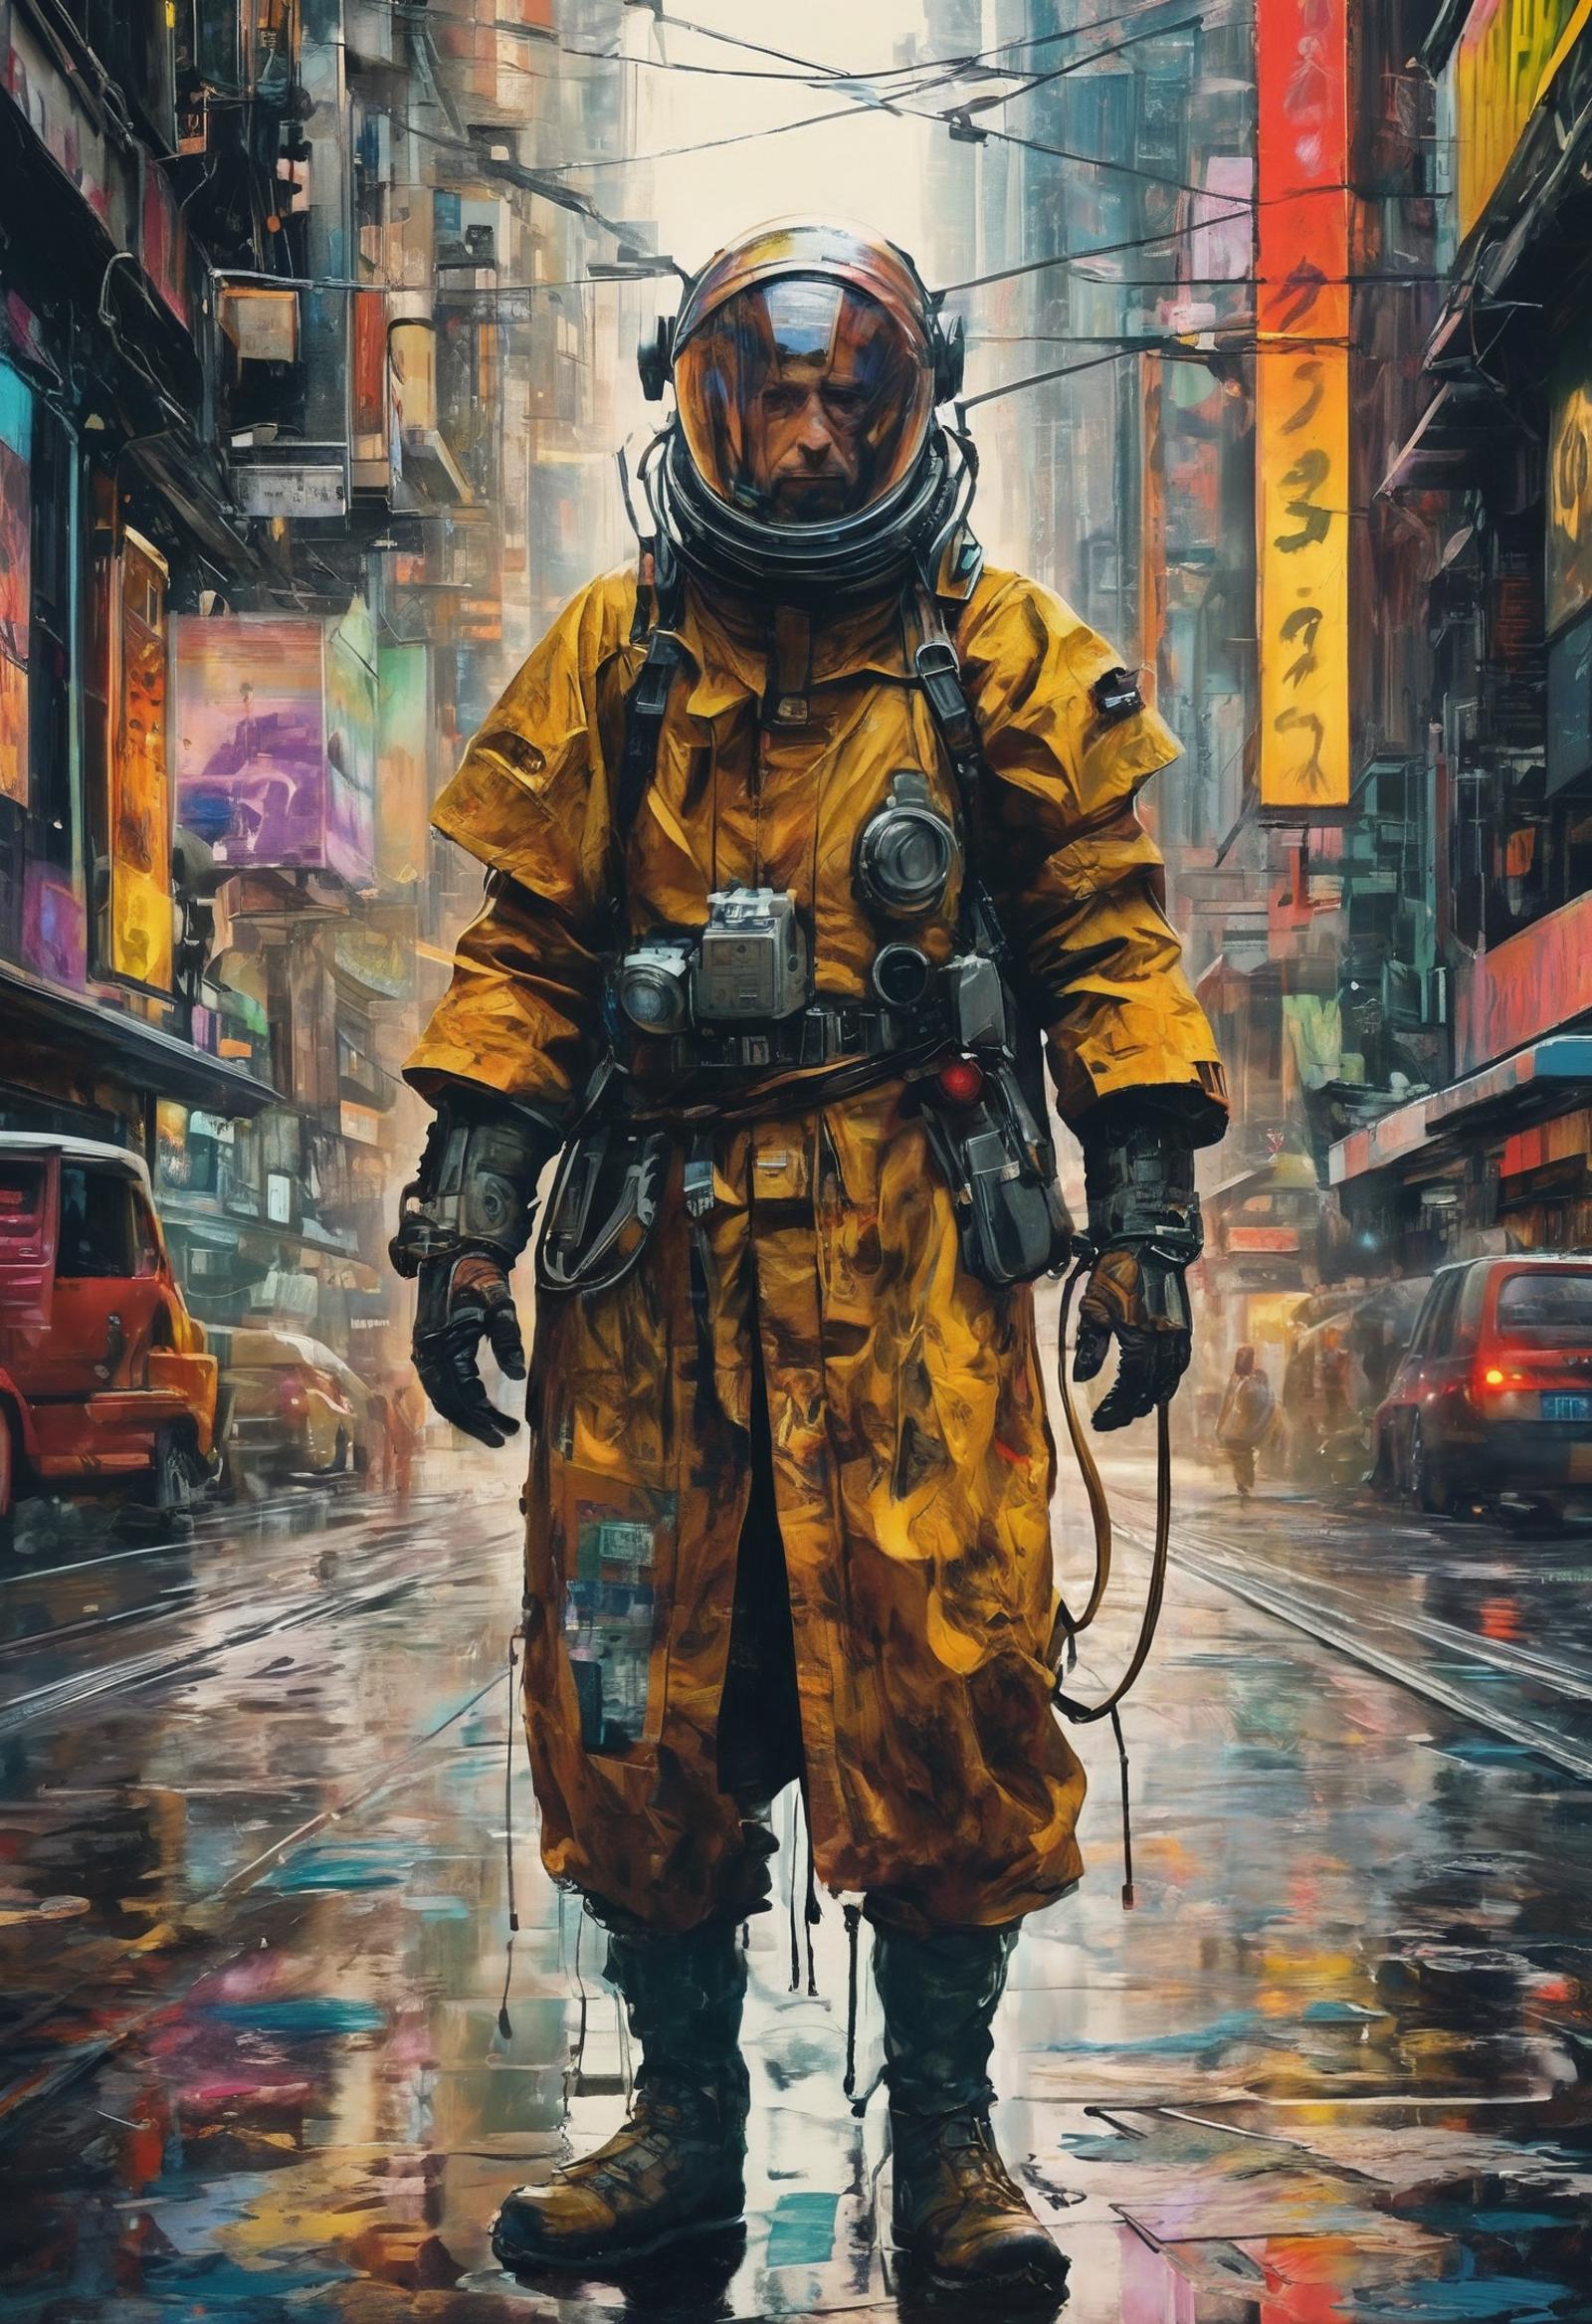 A man wearing a yellow space suit standing on a city street.